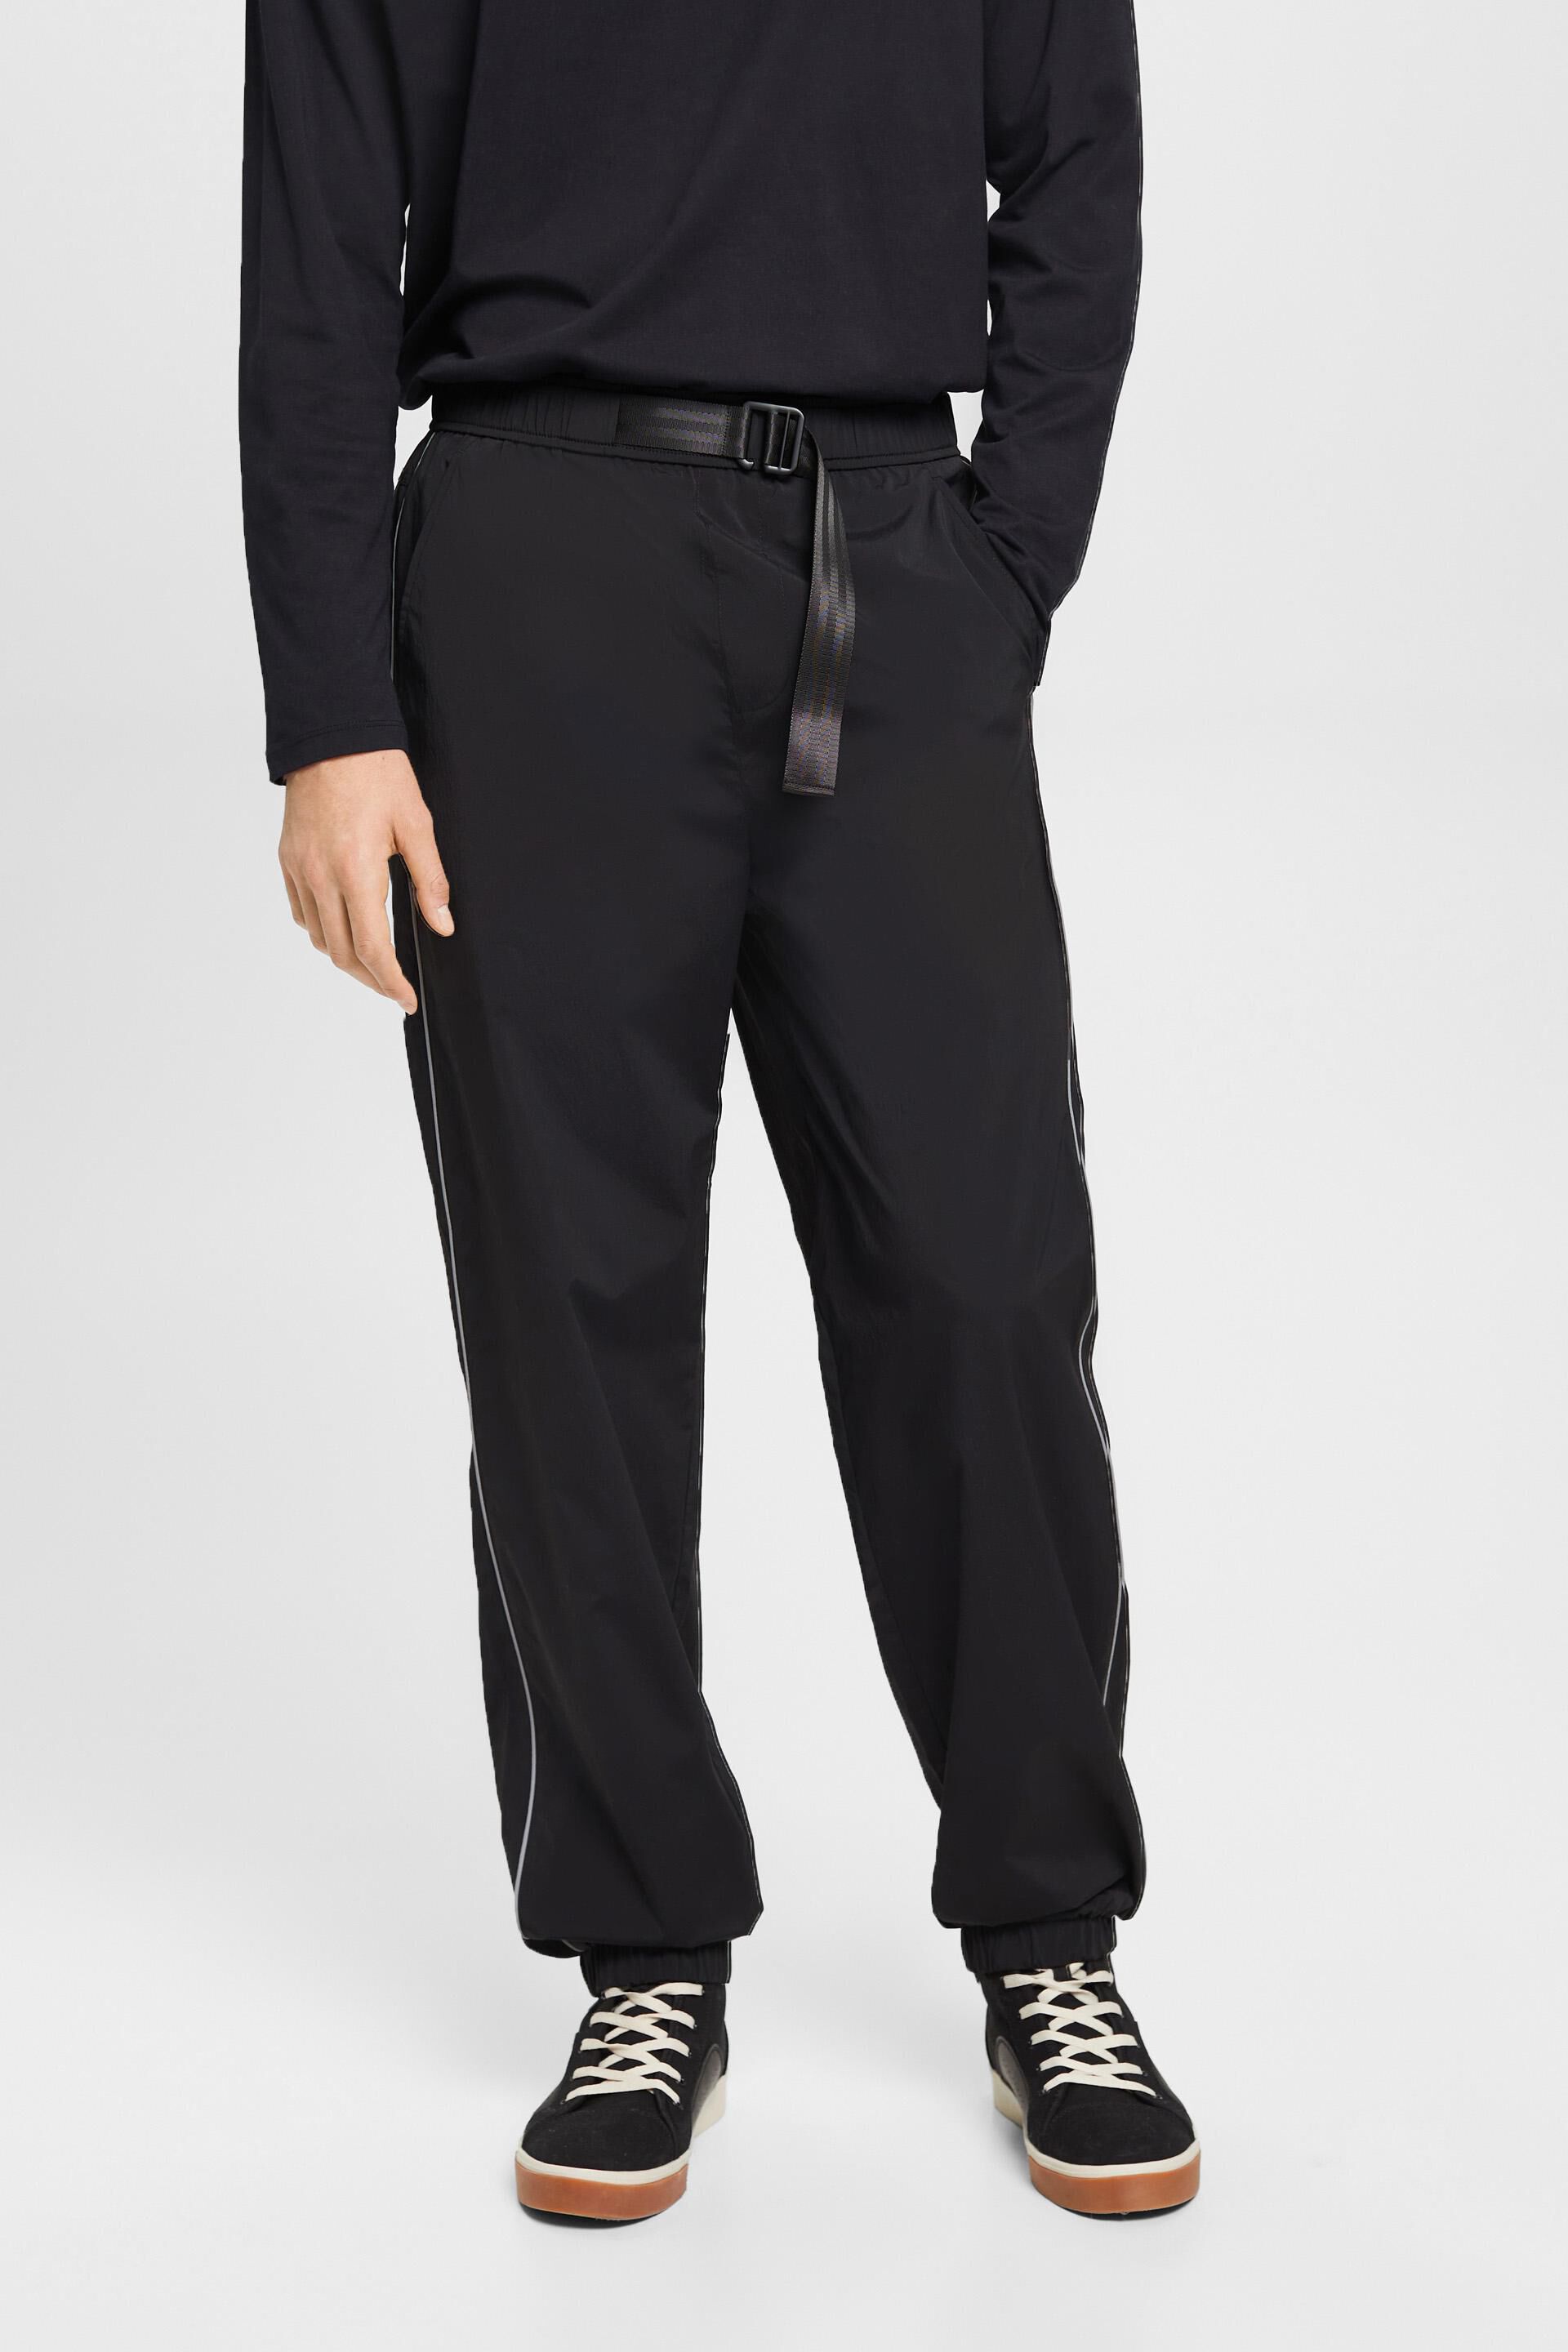 Esprit track pants High-rise fit tapered